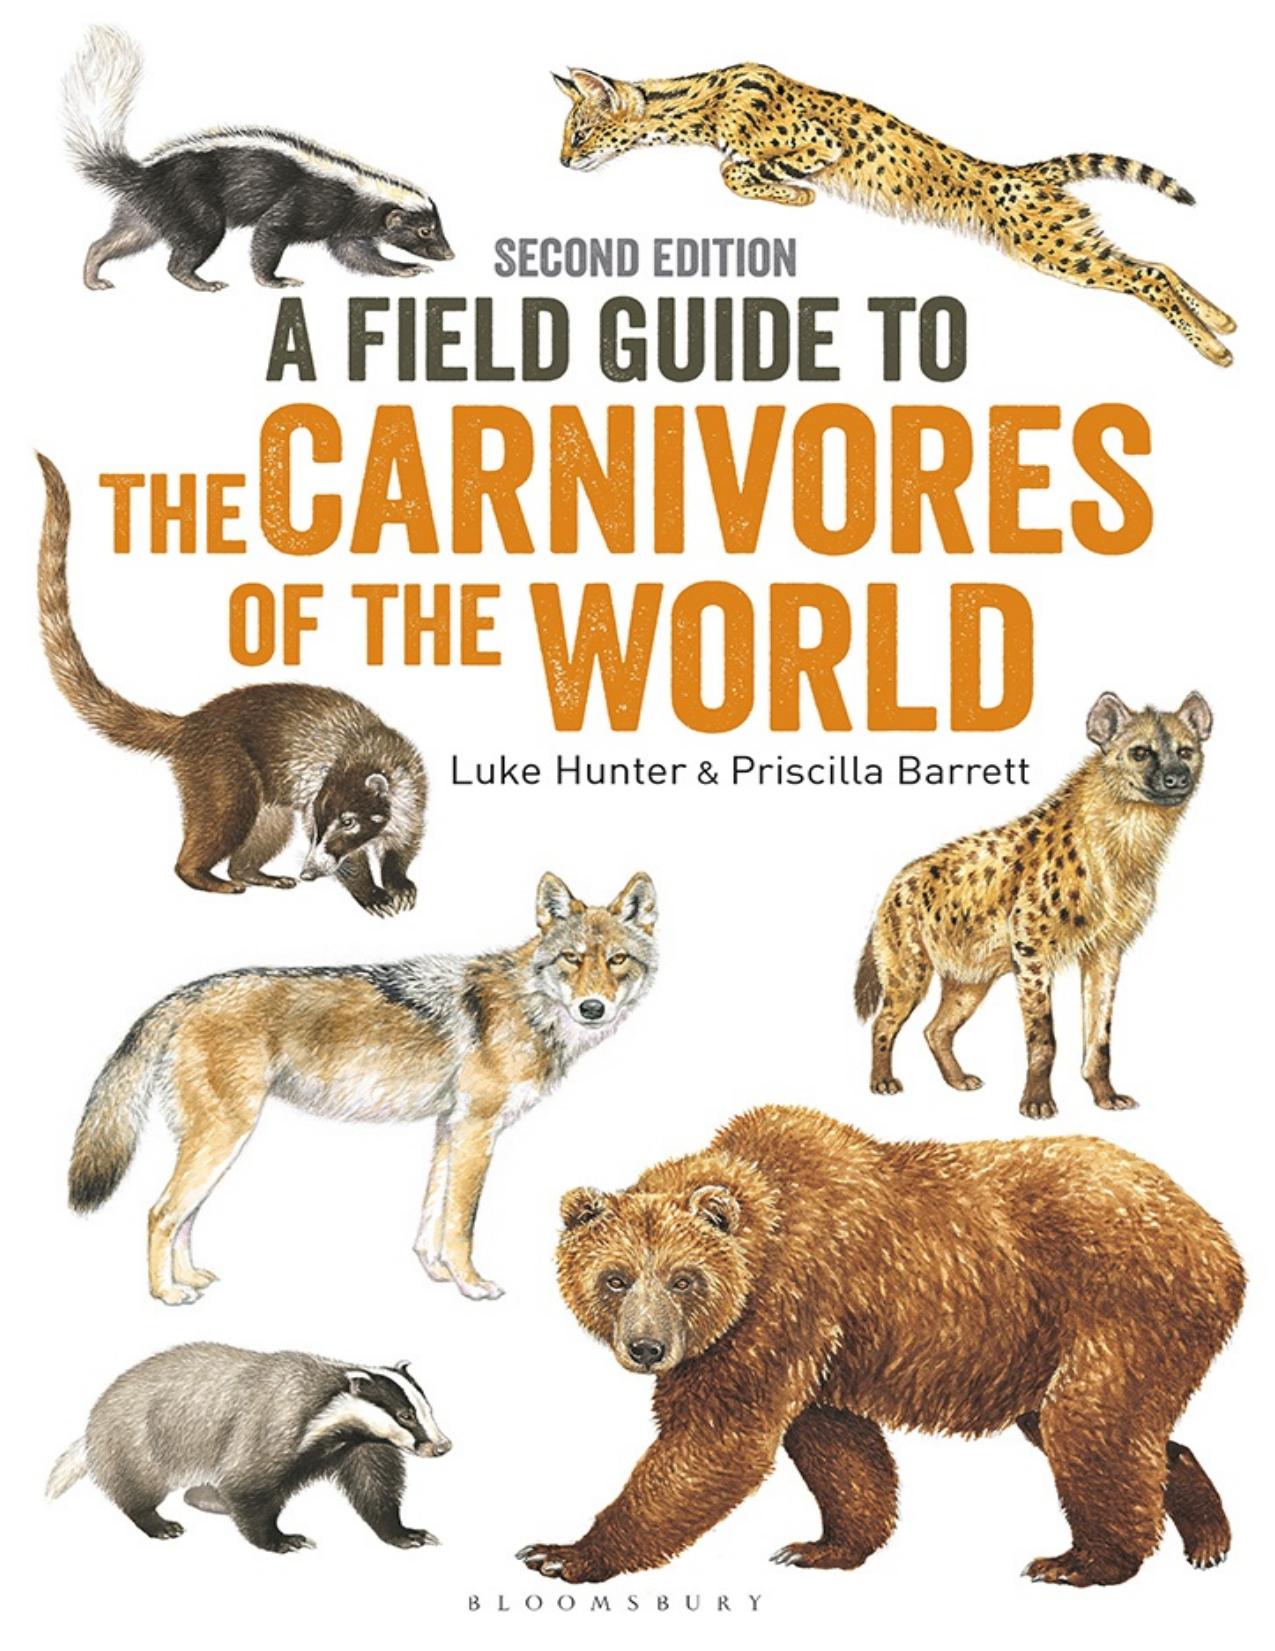 Field Guide to Carnivores of the World - PDFDrive.com